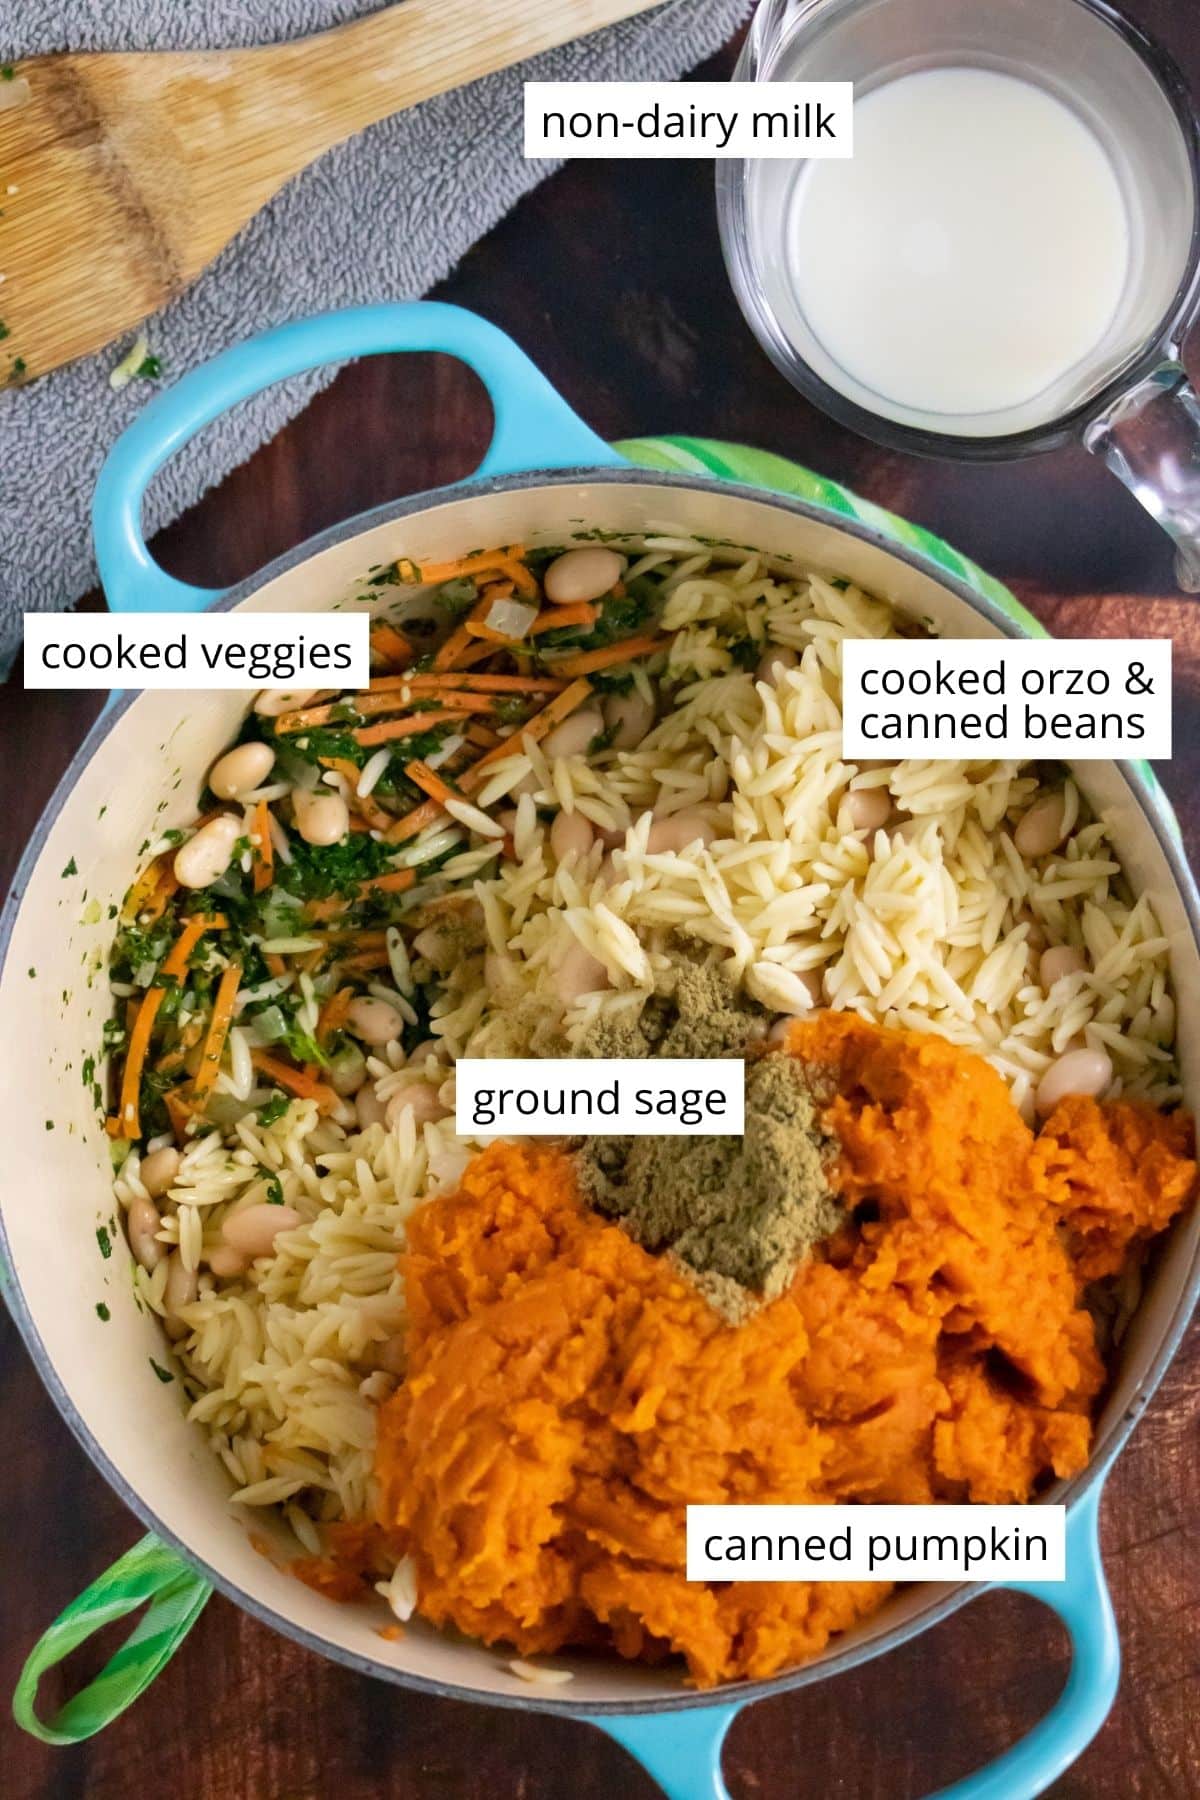 orzo, beans, veggies, pumpkin, and sage in the pan next to a measuring cup of non-dairy milk, text labels on each ingredient